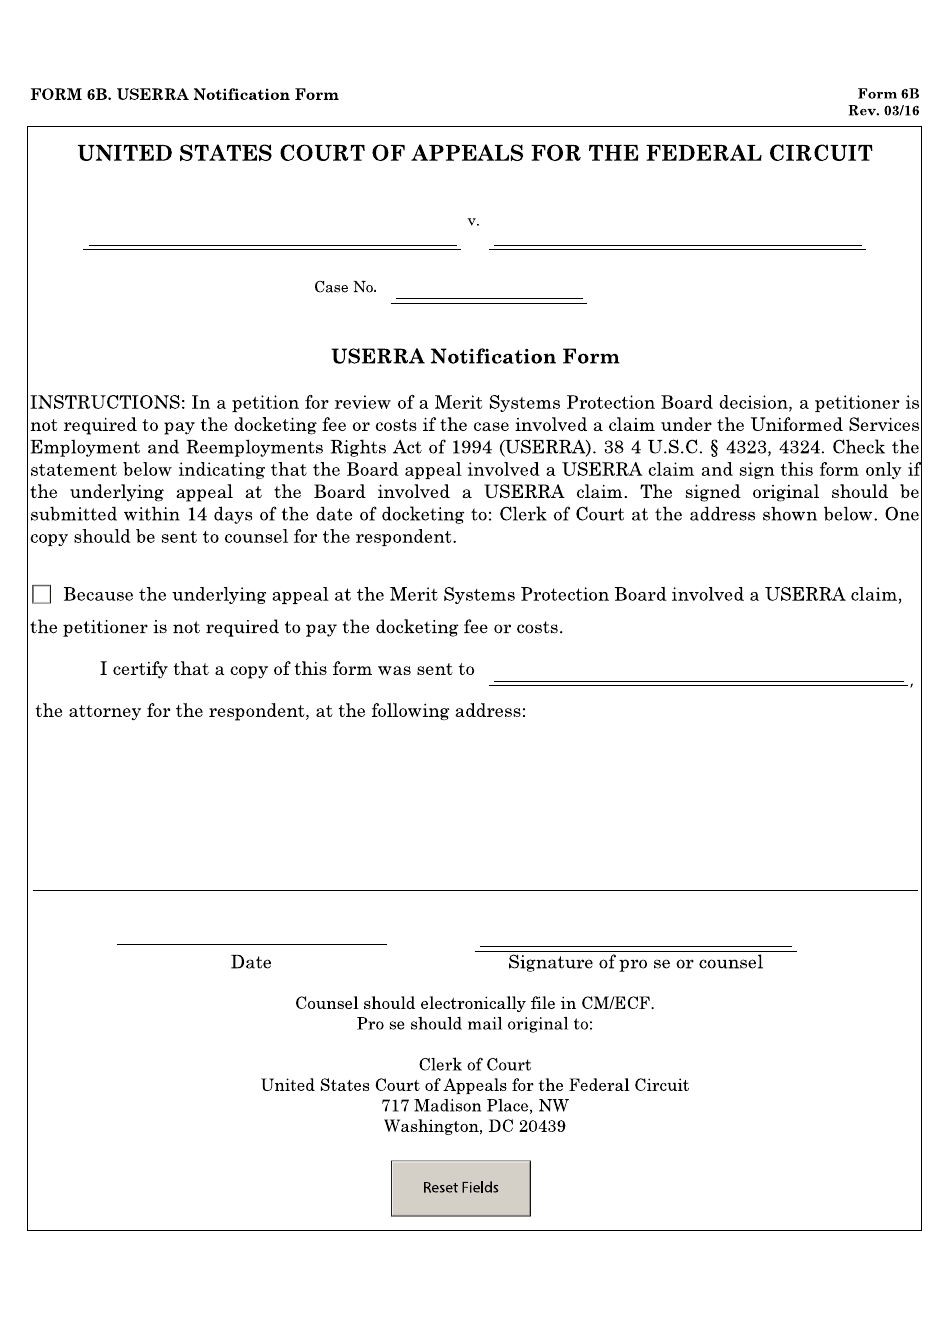 Form 6B Userra Notification Form, Page 1